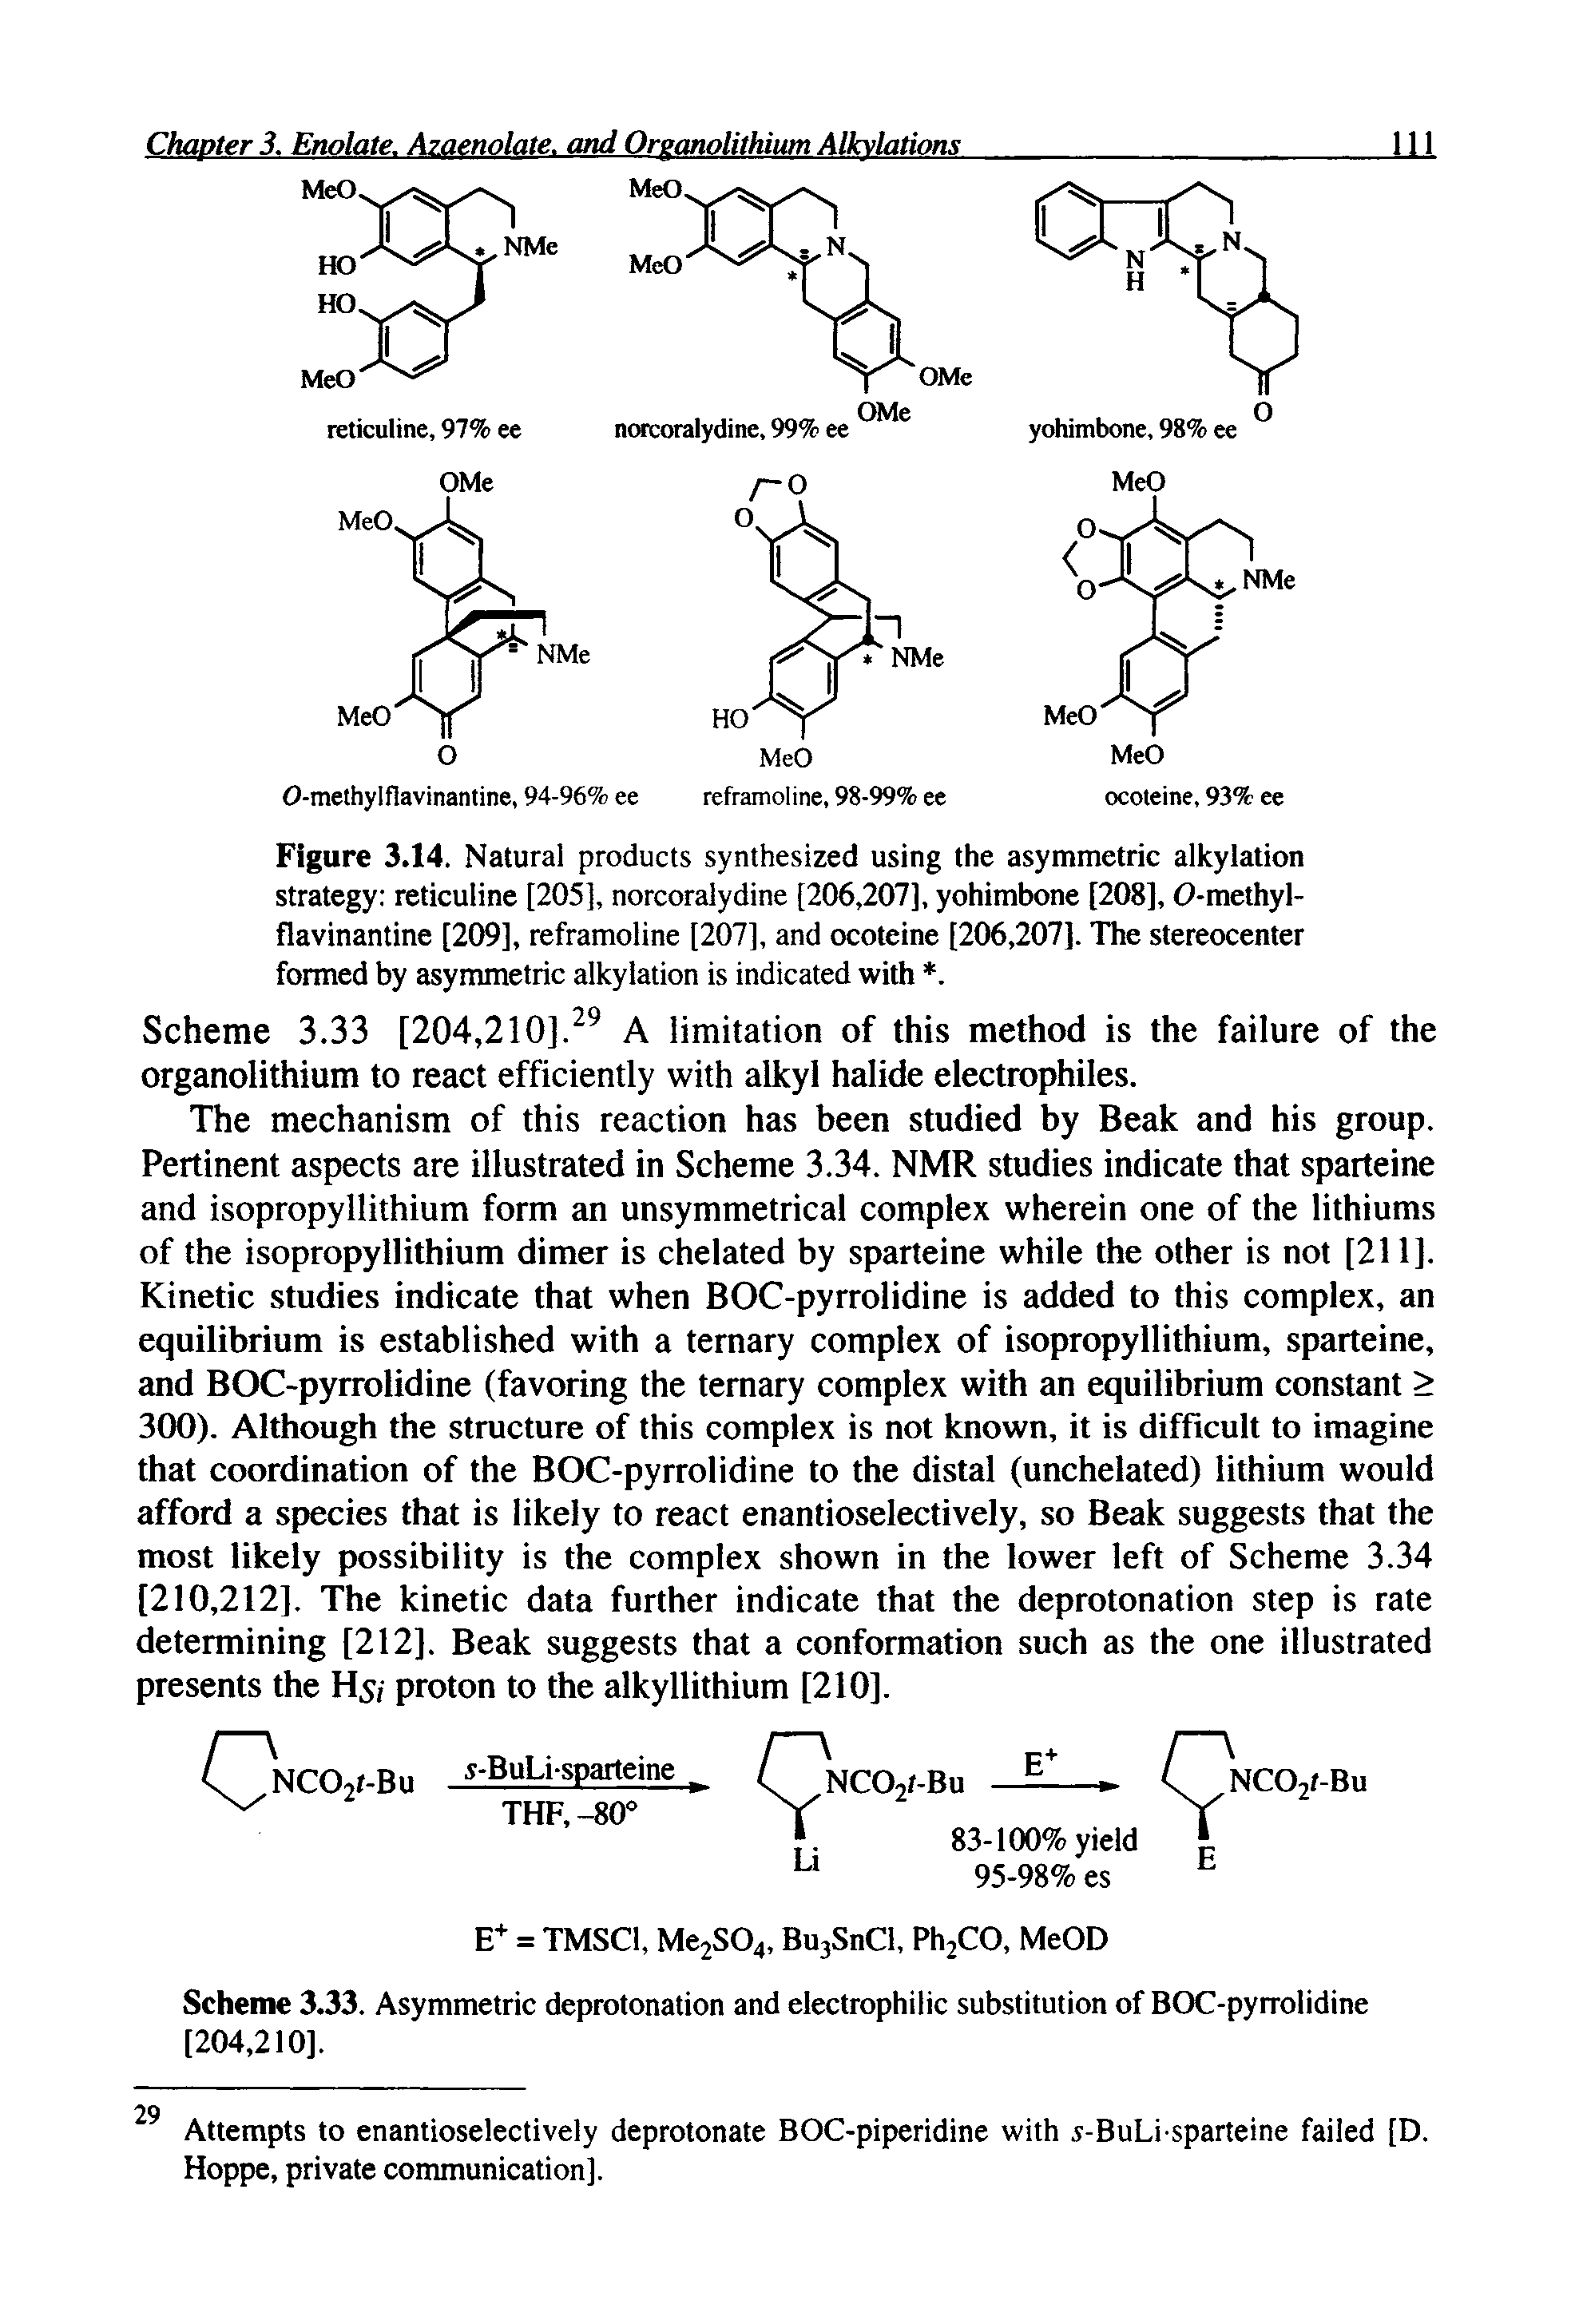 Scheme 3.33 [204,210]. A limitation of this method is the failure of the organolithium to react efficiently with alkyl halide electrophiles.